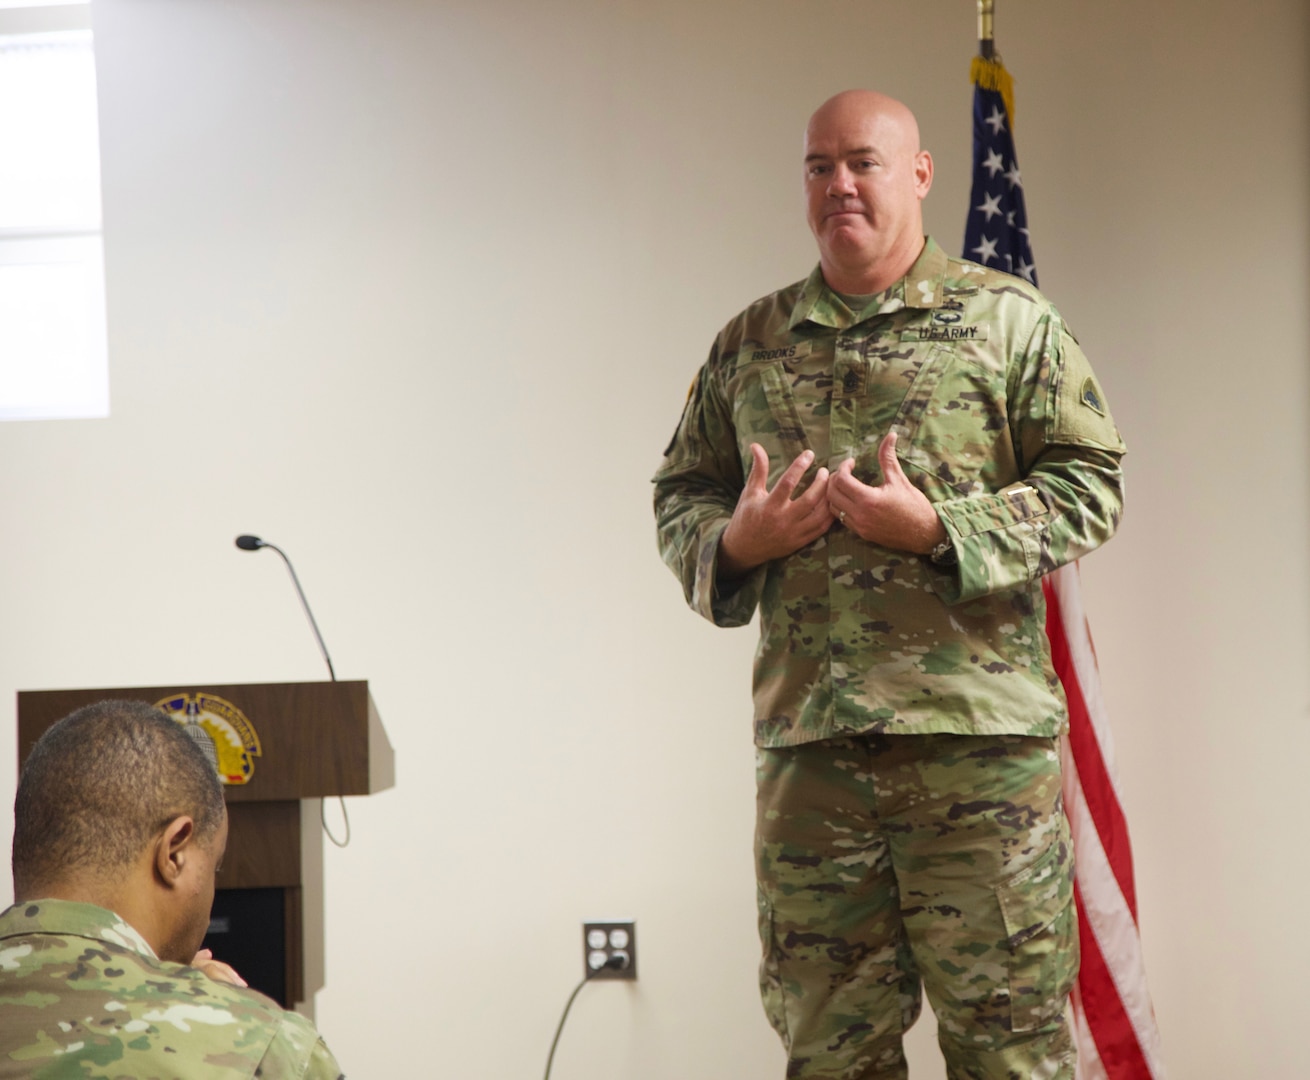 District of Columbia National Guard’s Command Sergeant Major Michael R. Brooks discusses his struggles in life during the DCNG’s Suicide Prevention Awareness Month event Sept. 18. He encouraged the DCNG to really listen to people who need to talk about life’s challenges.